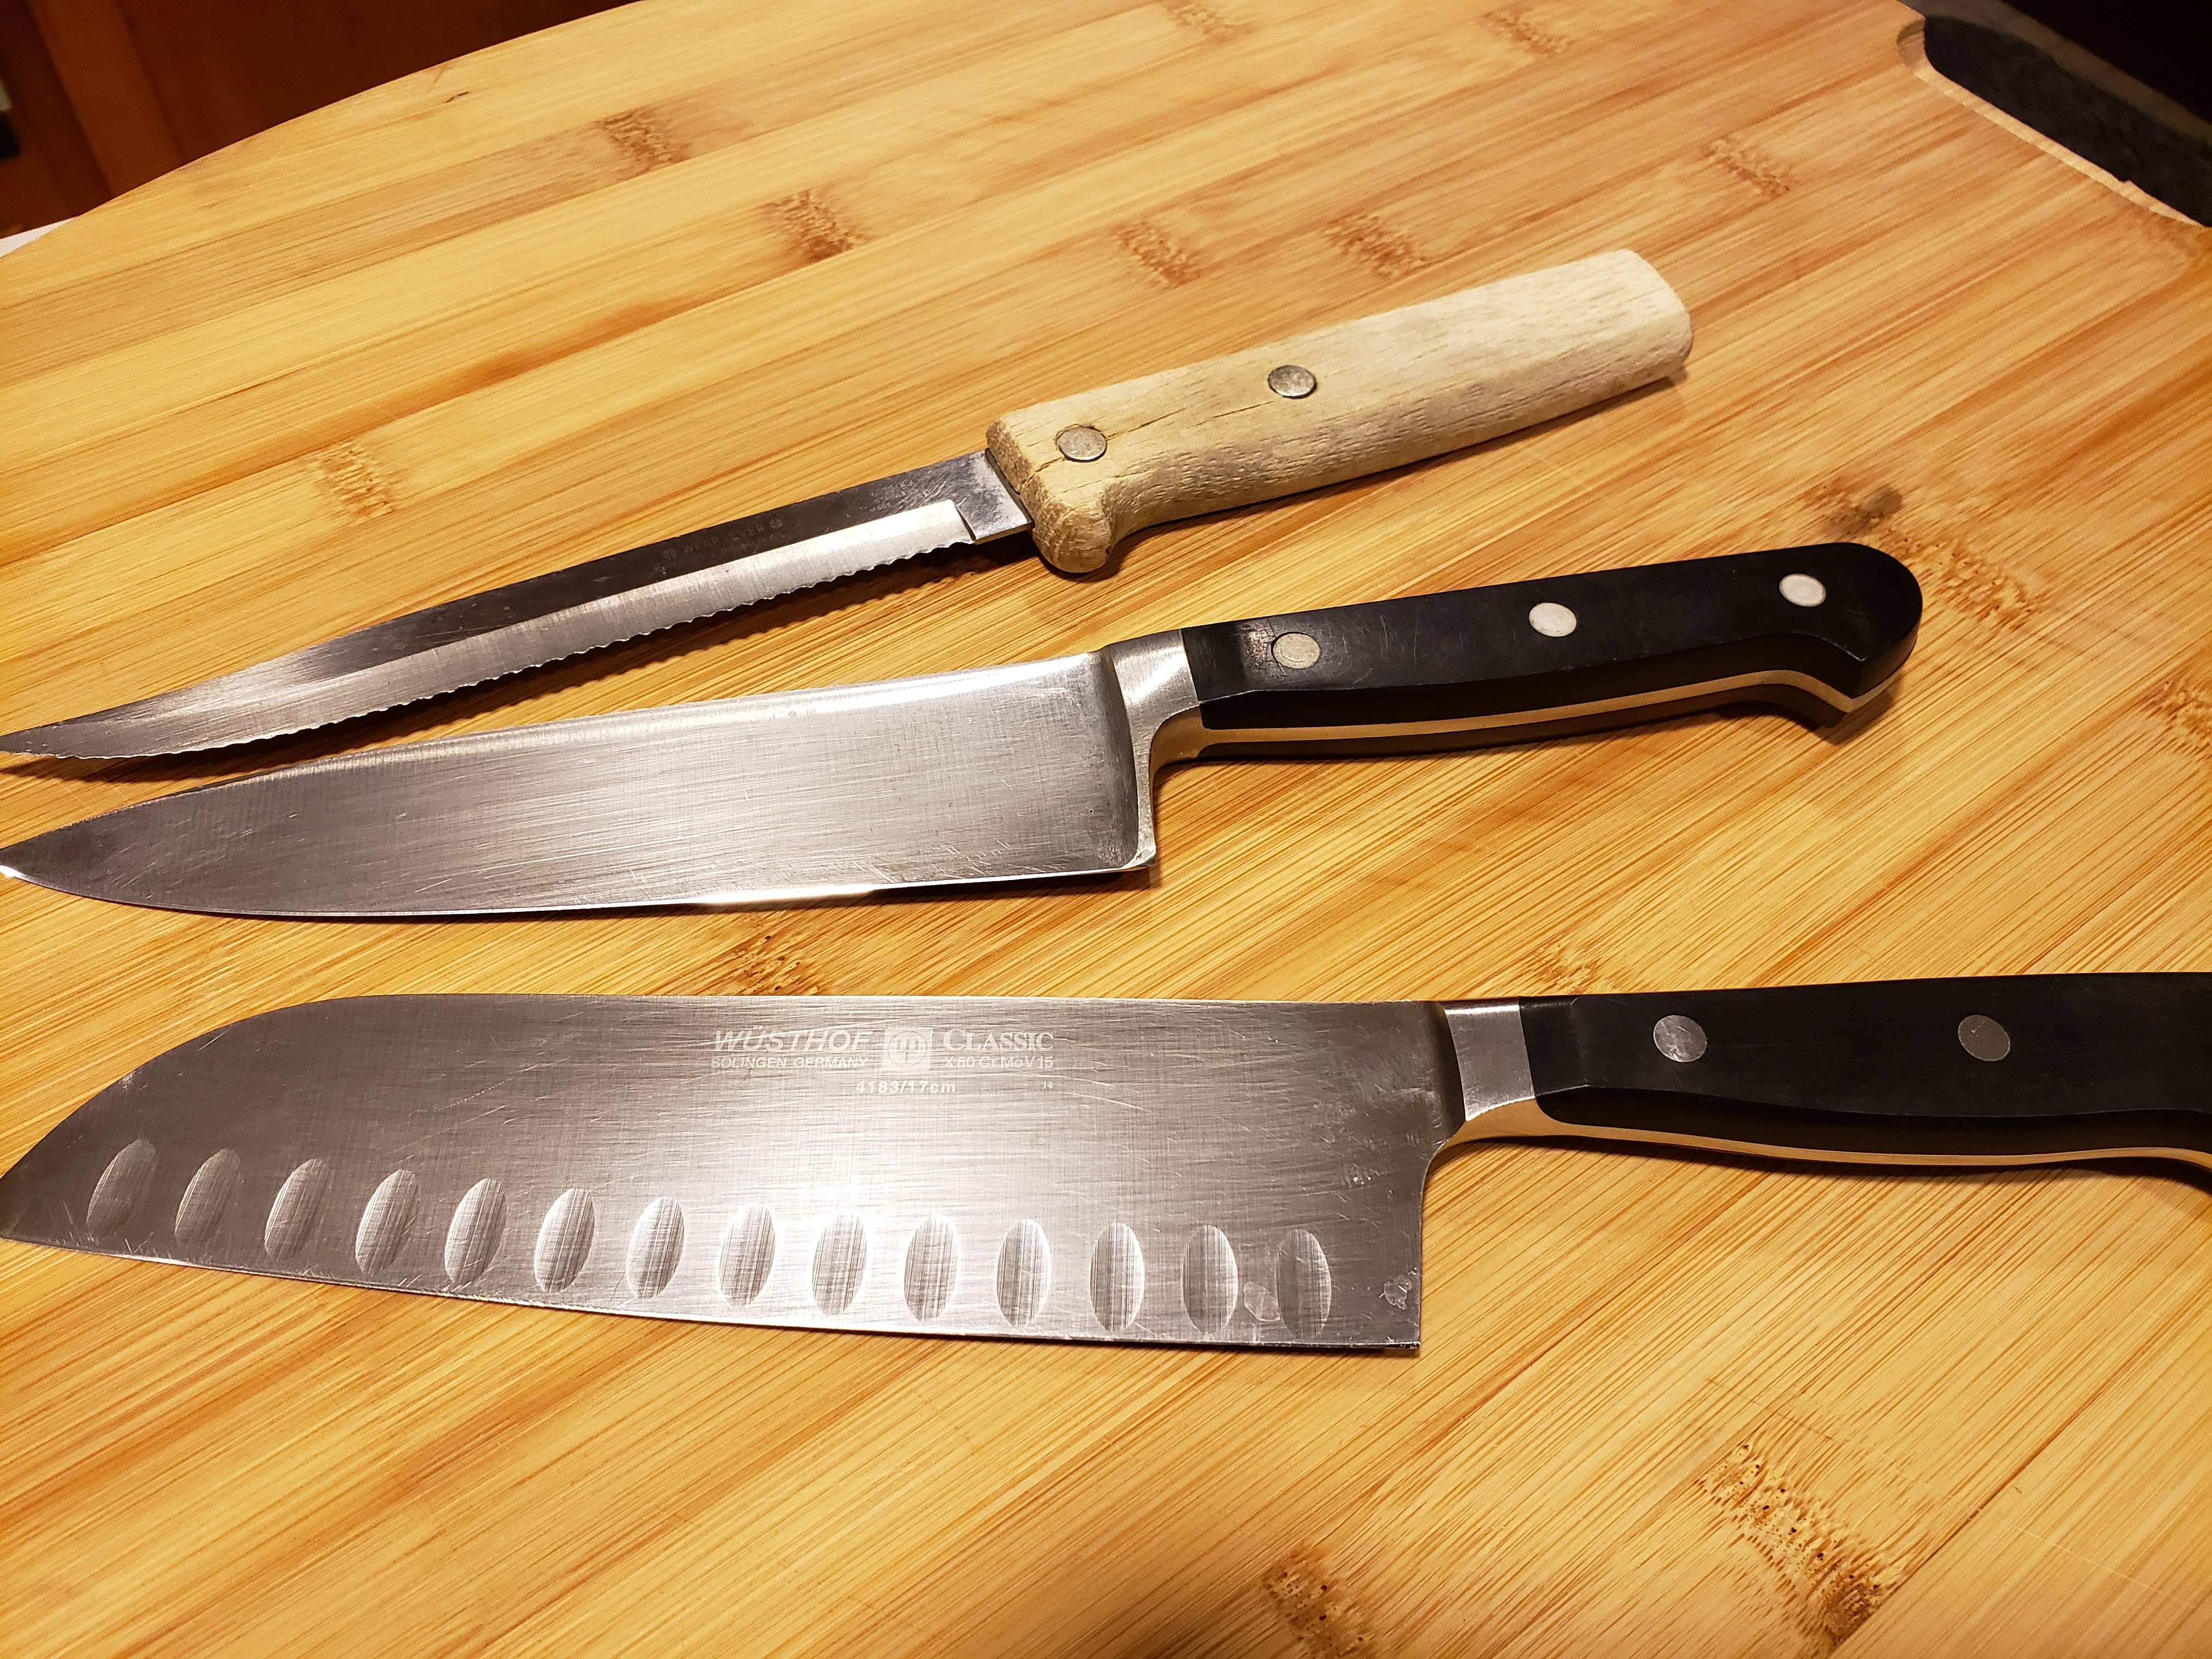 http://franksfeast.com/wp-content/uploads/2019/01/1.-The-three-kinves-I-brought-for-sharpening.jpg